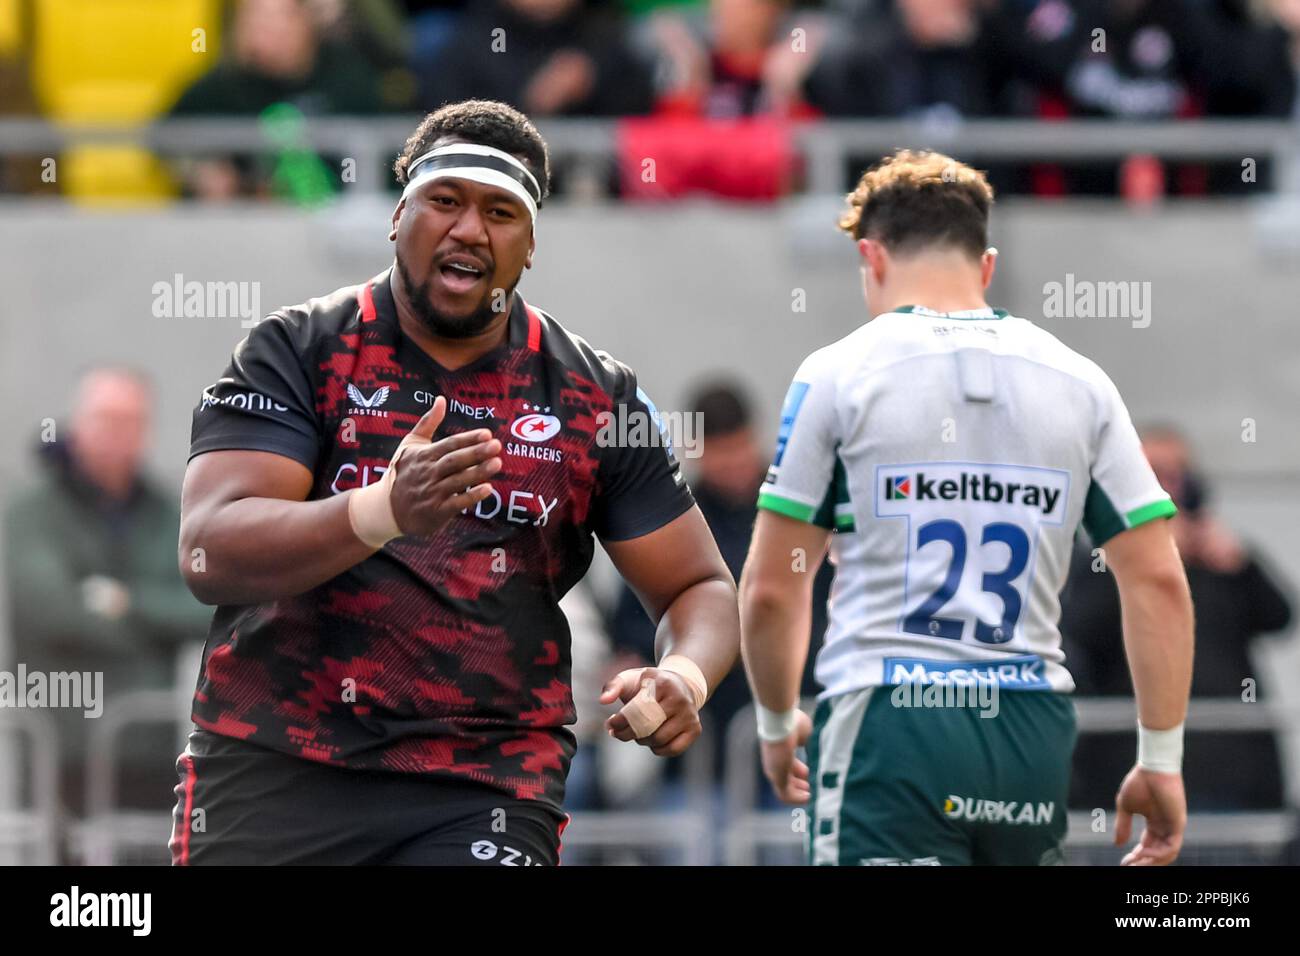 Eroni Mawi of Saracens runs in Saracens final try of the afternoon late in the second half during the Gallagher Premiership Rugby match between Saracens and London Irish at the StoneX Stadium,